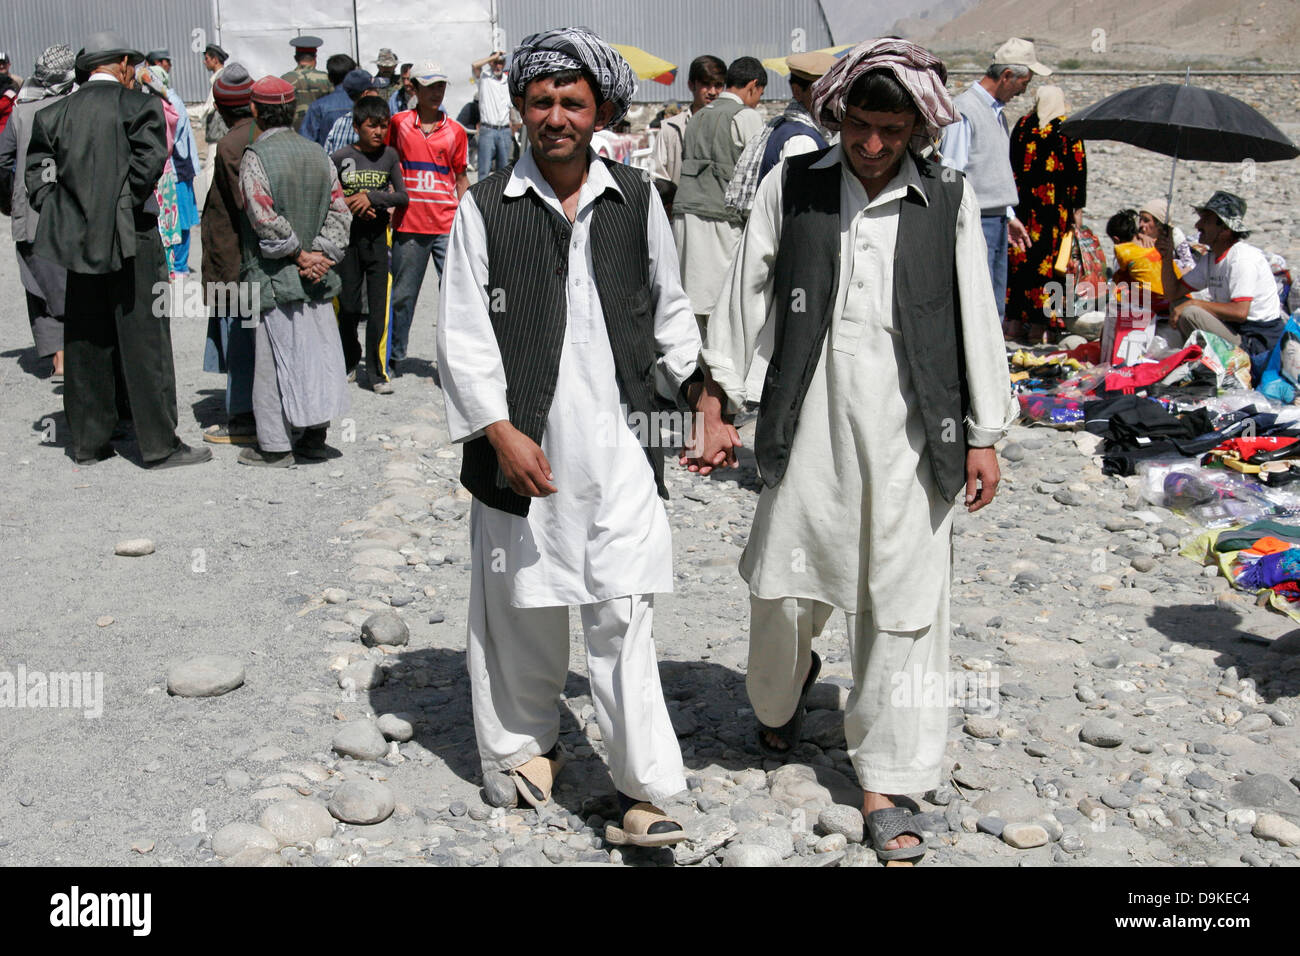 Afghan men wearing traditional clothes, transborder market near Ishkashim on the border between Tajikistan and Afghanistan Stock Photo